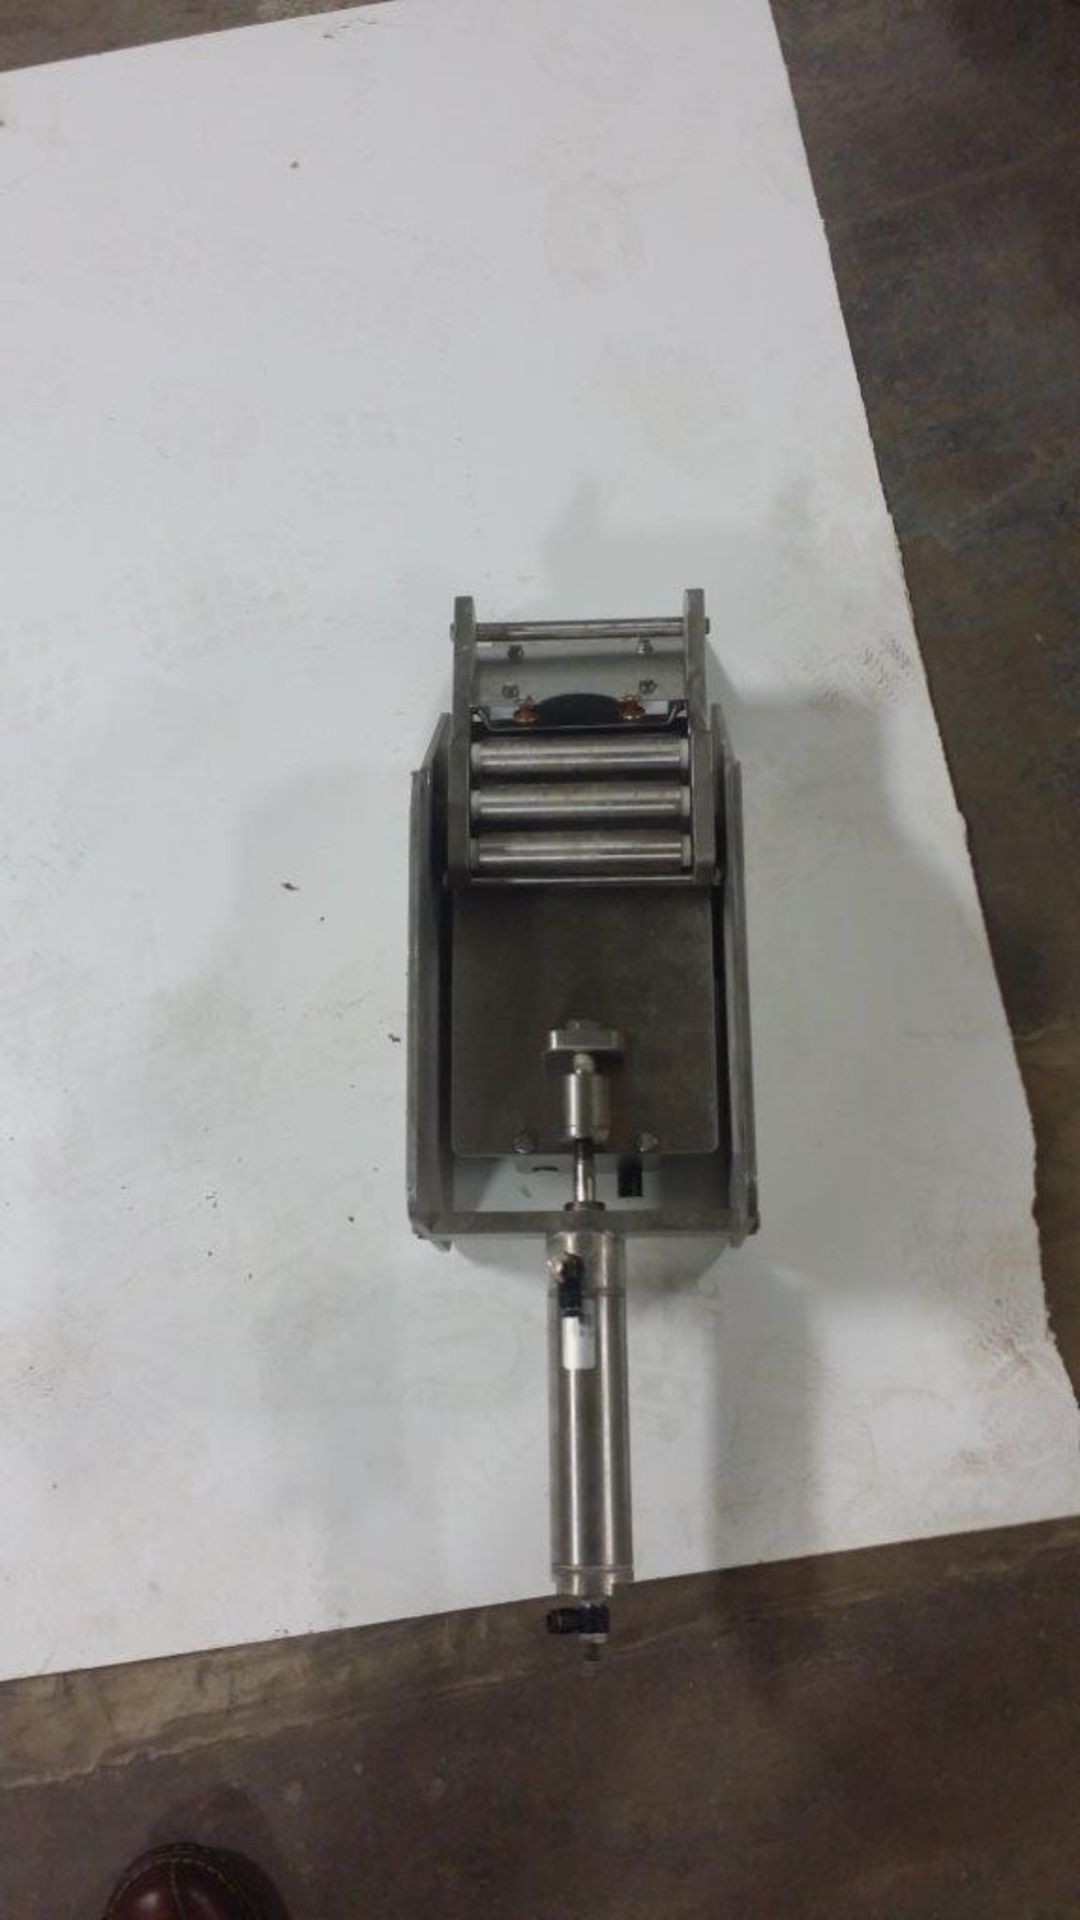 Stainless Steel Capper,  LOCATION - Indianapolis, IN 46077 - Image 3 of 3